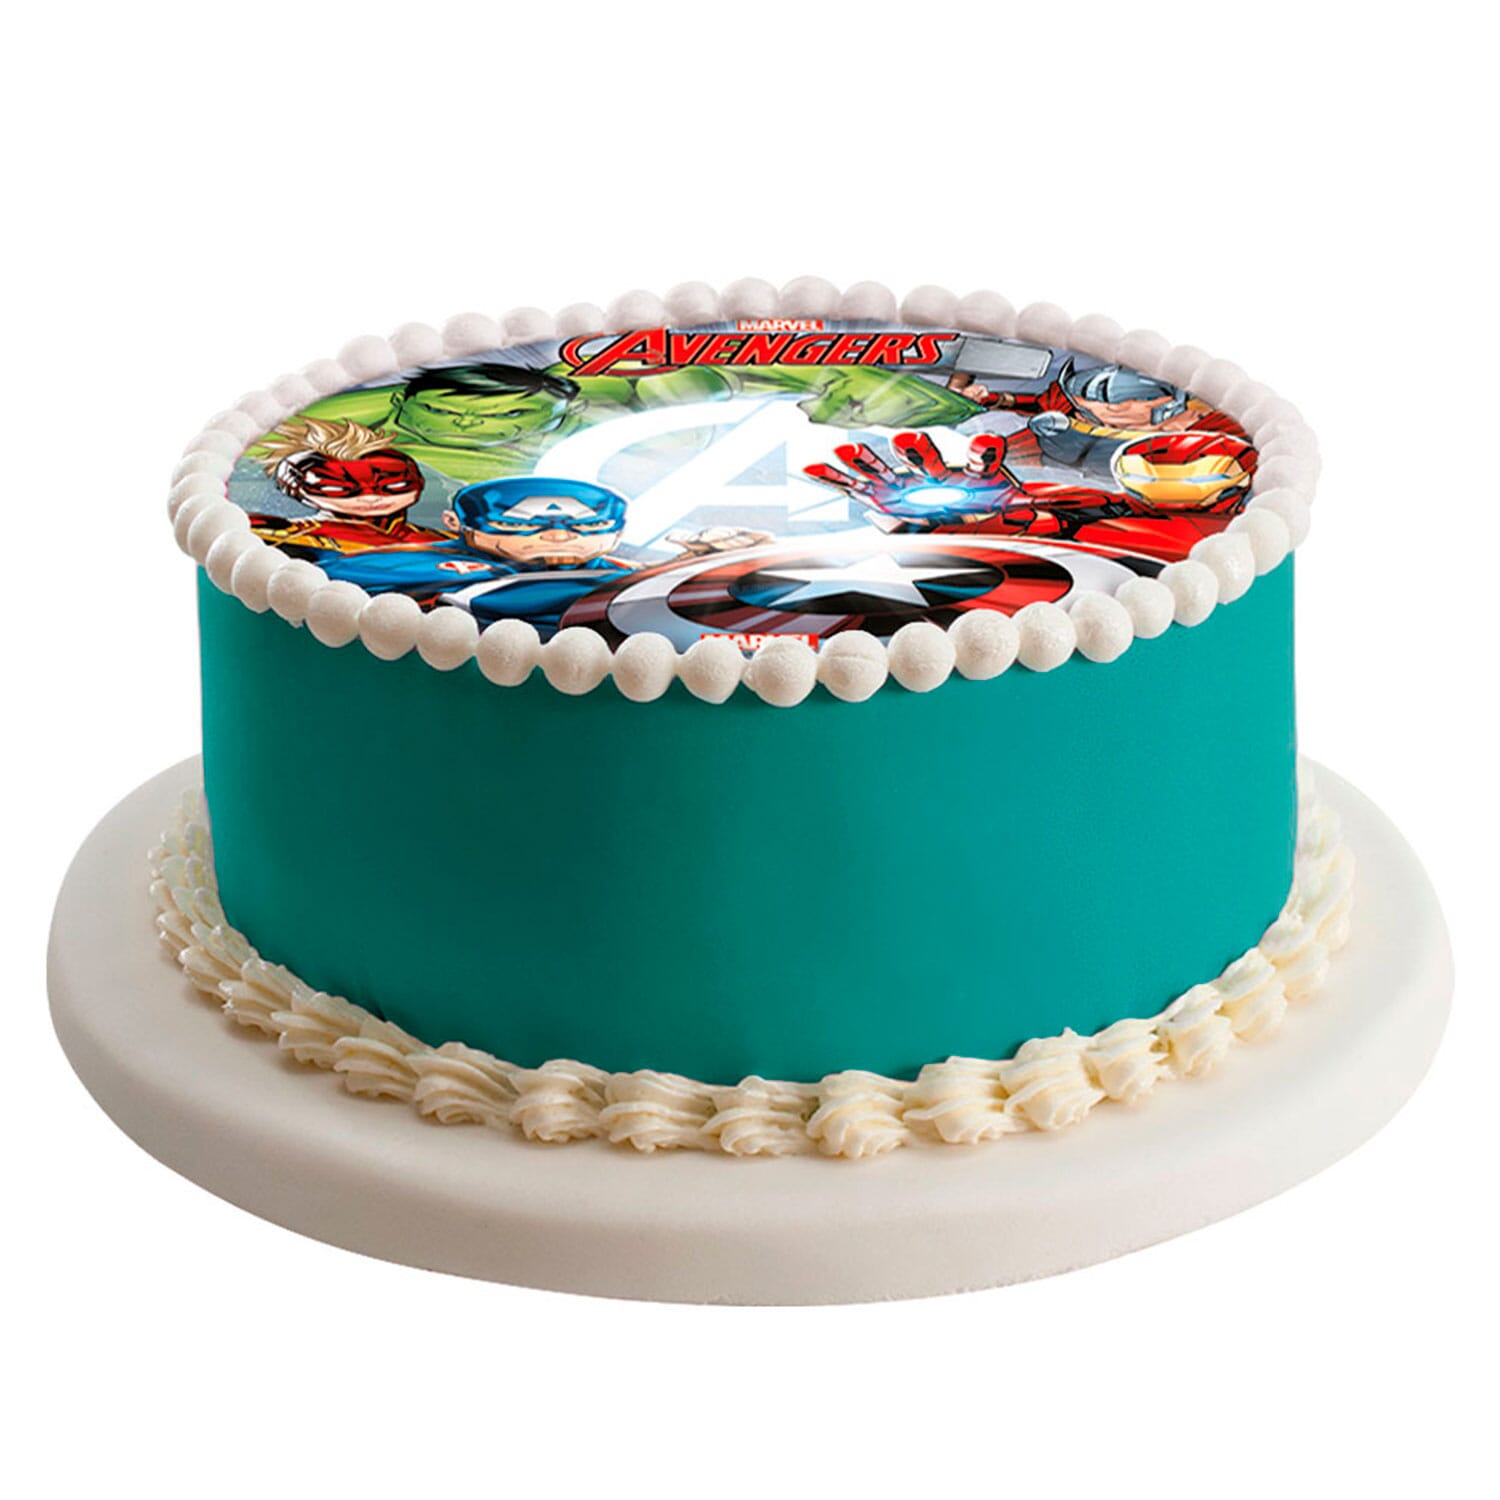 Geek Cake Friday: Top 10 Marvel Avengers Cakes - Kitchen Overlord - Your  Home for Geeky Cookbooks and Recipes!